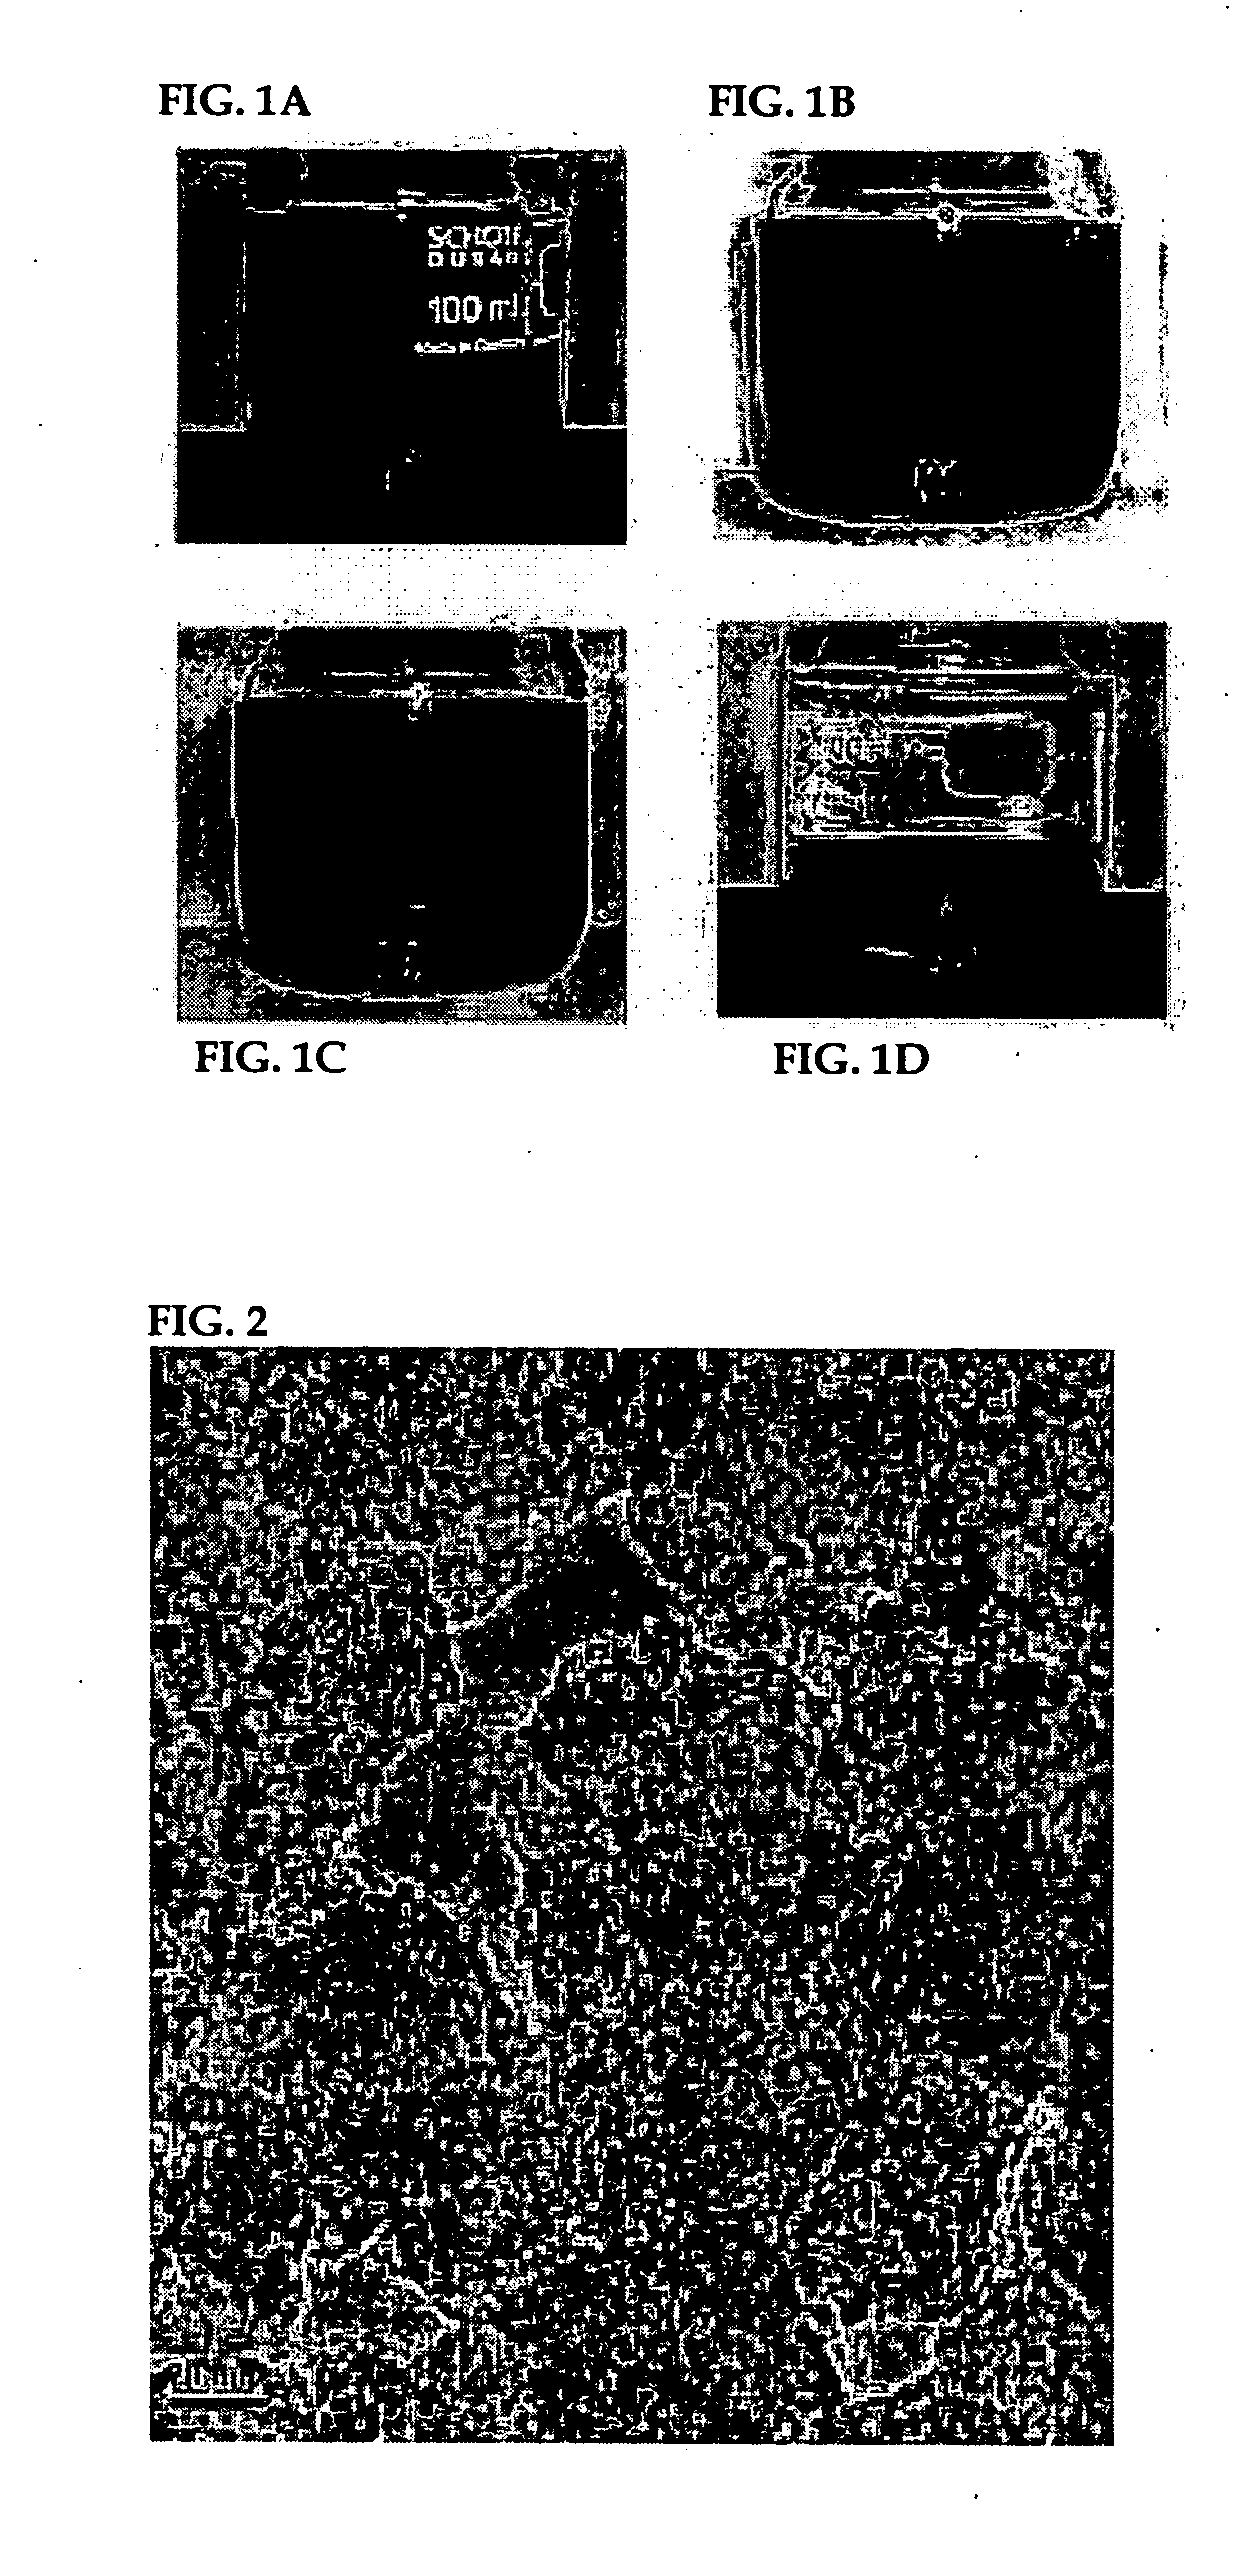 Method for preparation of highly dispersed supported platinum catalyst